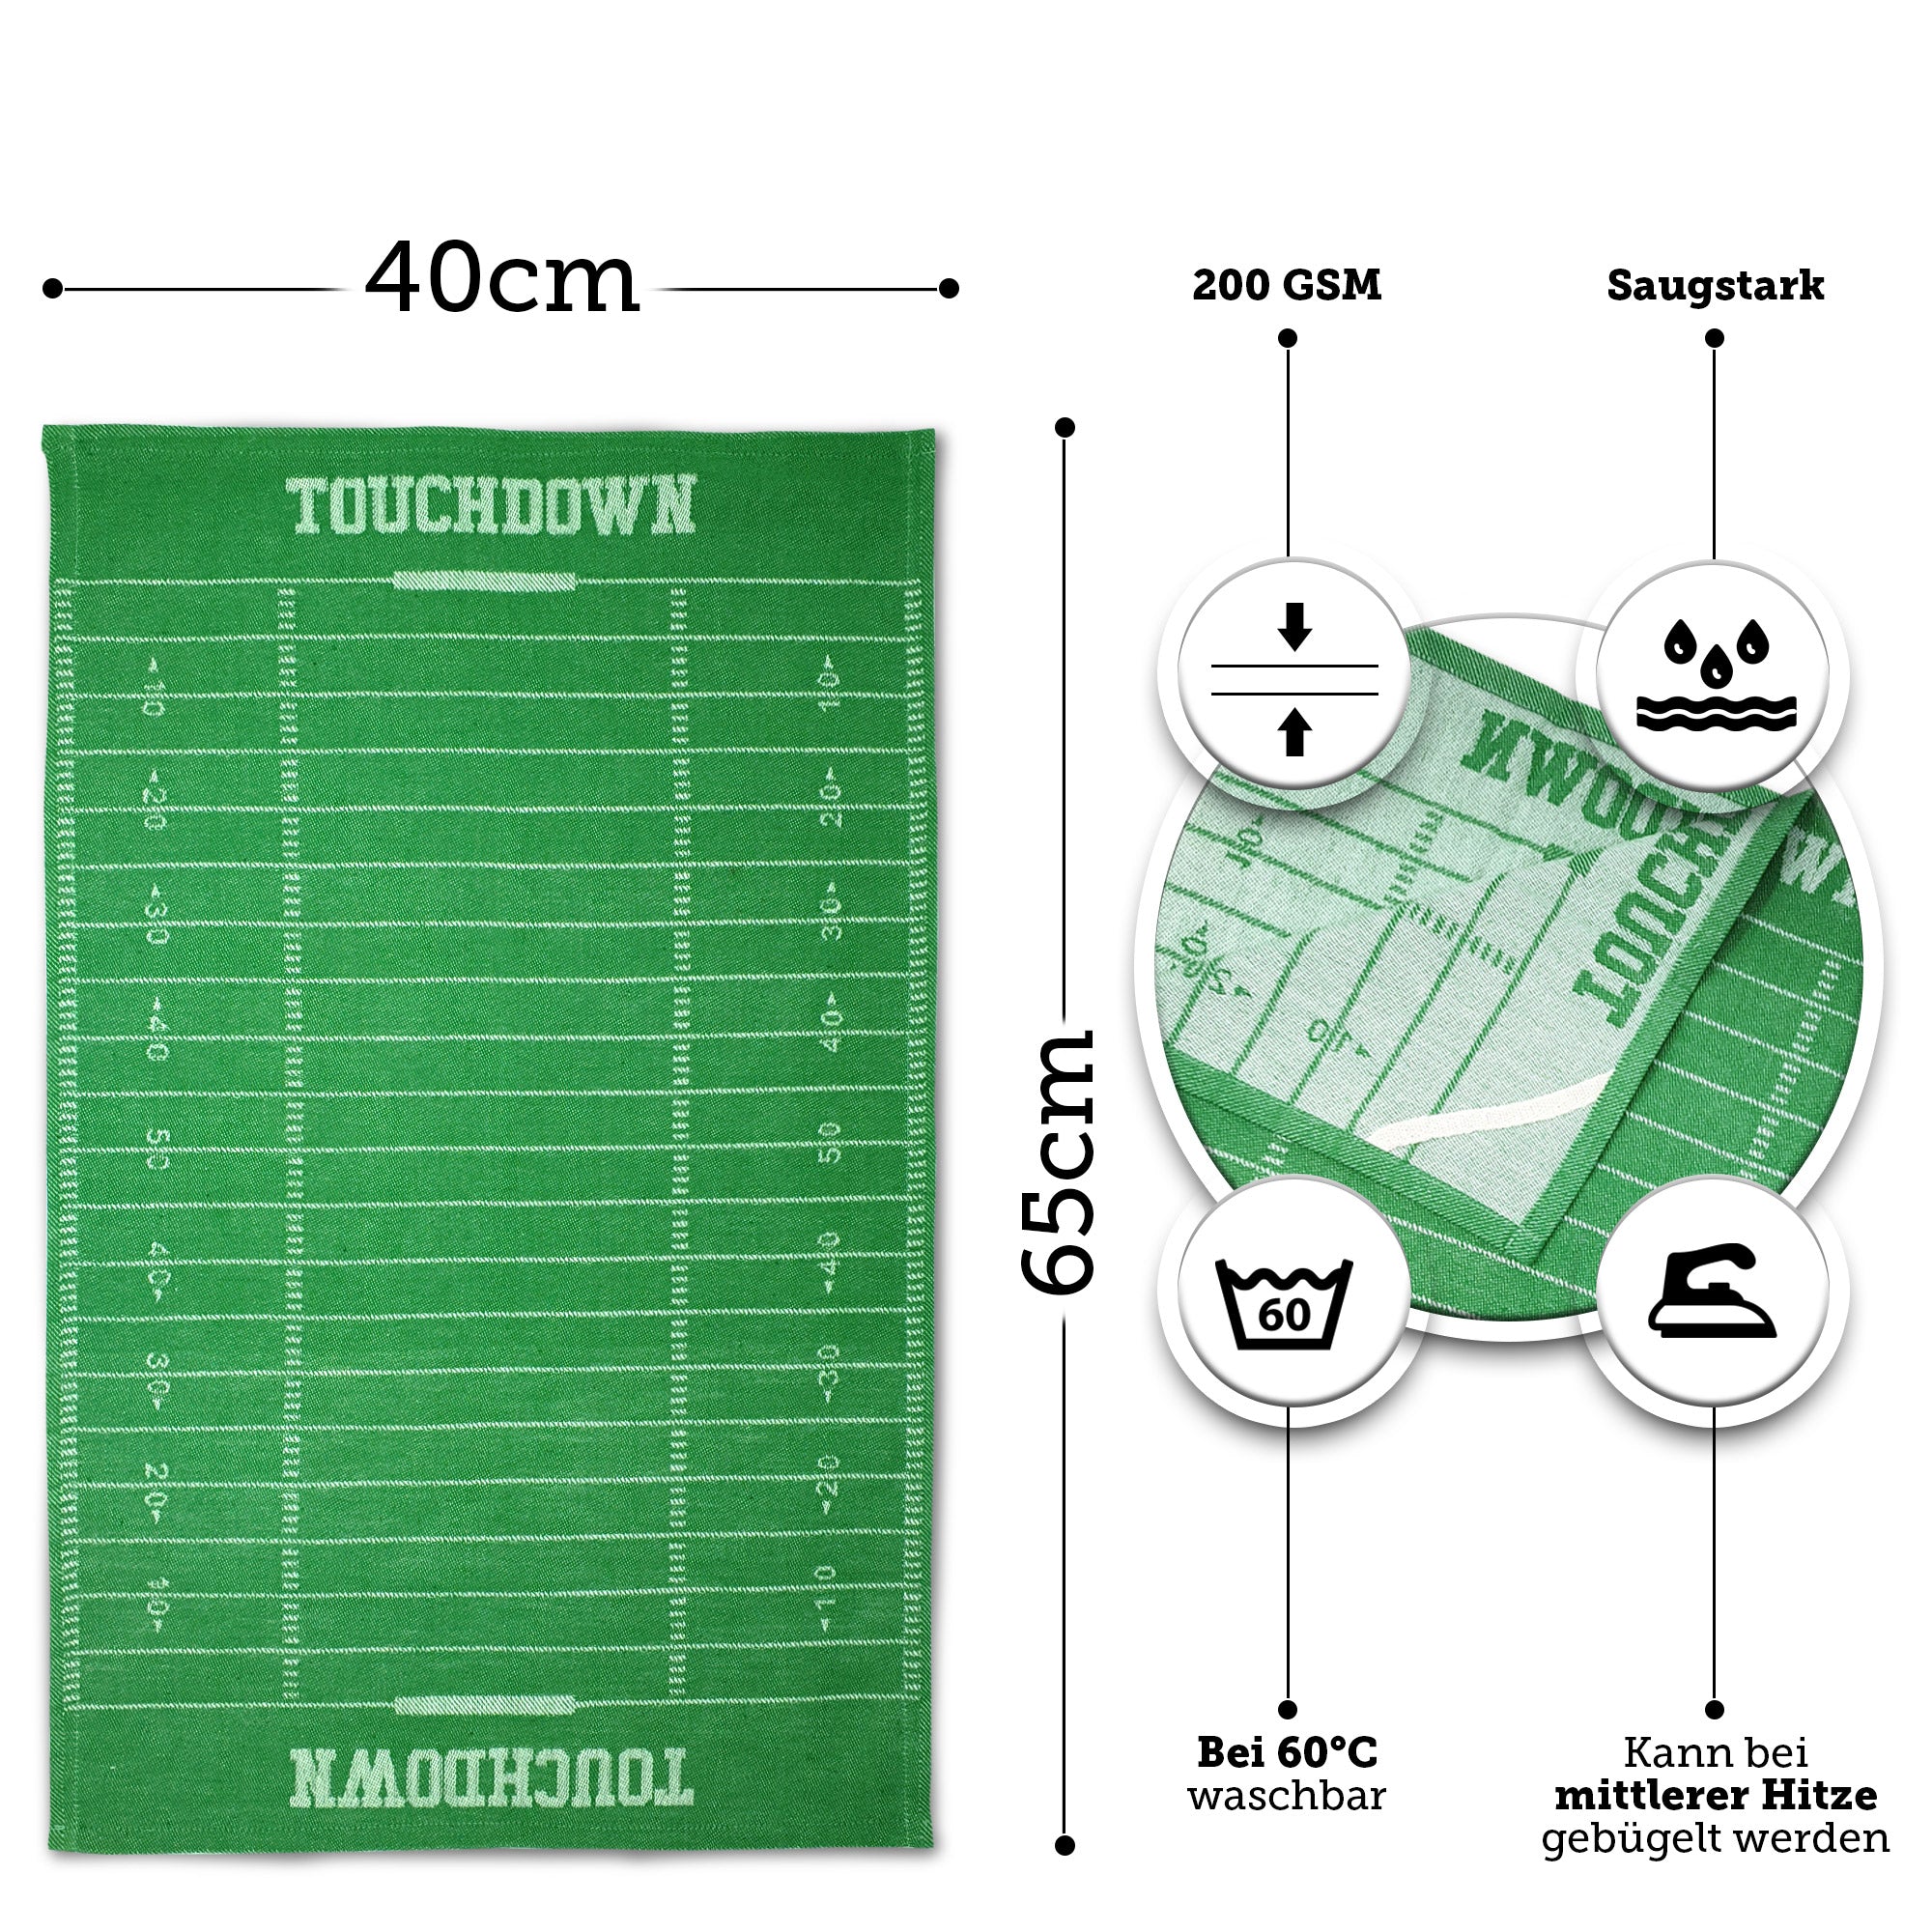 40YARDS American Football tea towels (2 pieces) in playing field design